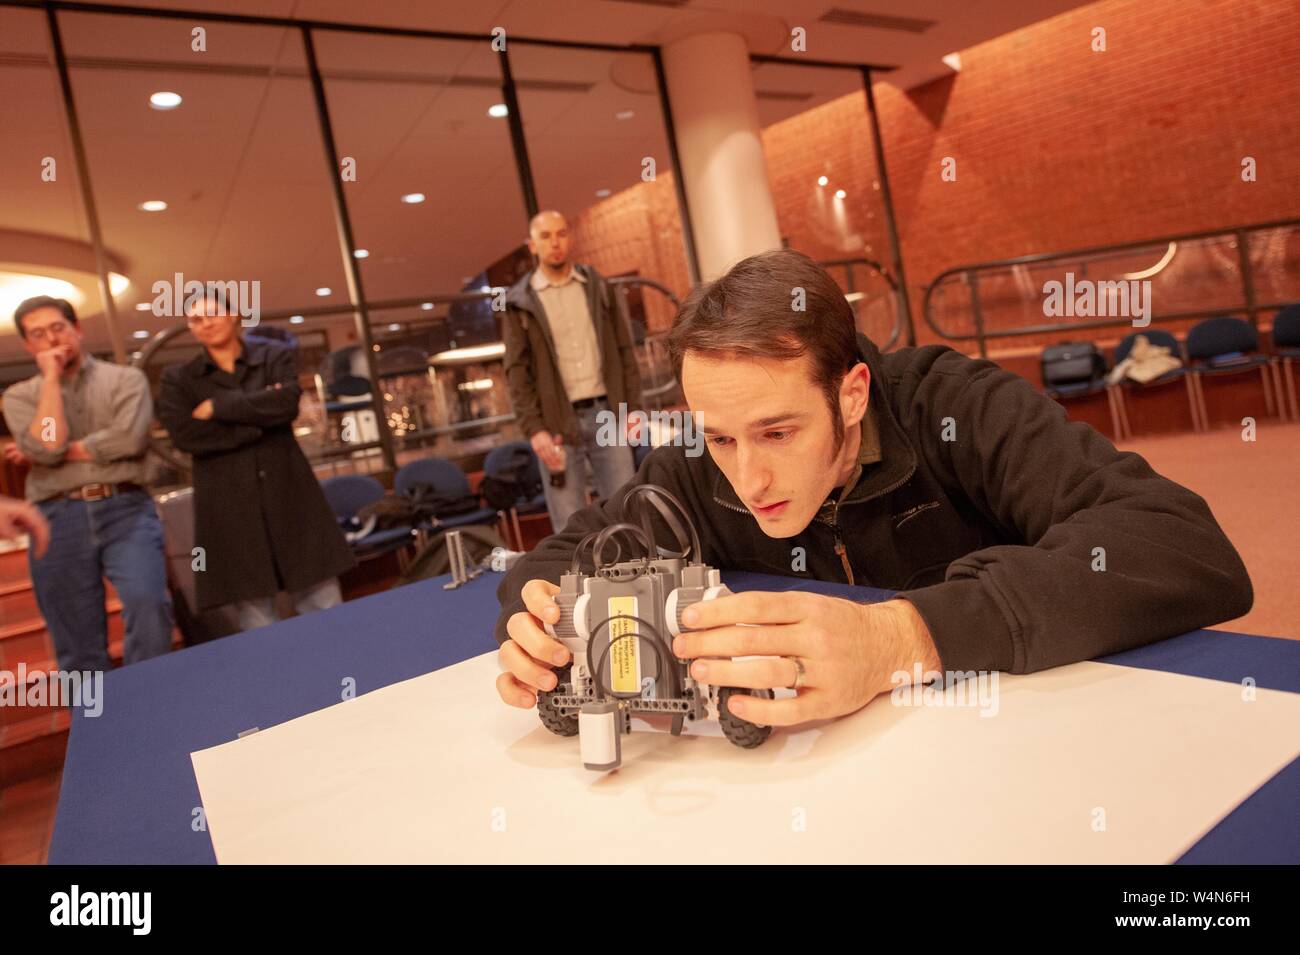 A competitor leans over a table to adjust his project during a Lego Robotics Competition associated with Engineering Programs for Professionals (EPP) at the Johns Hopkins University, Baltimore, Maryland, December 3, 2007. From the Homewood Photography Collection. () Stock Photo